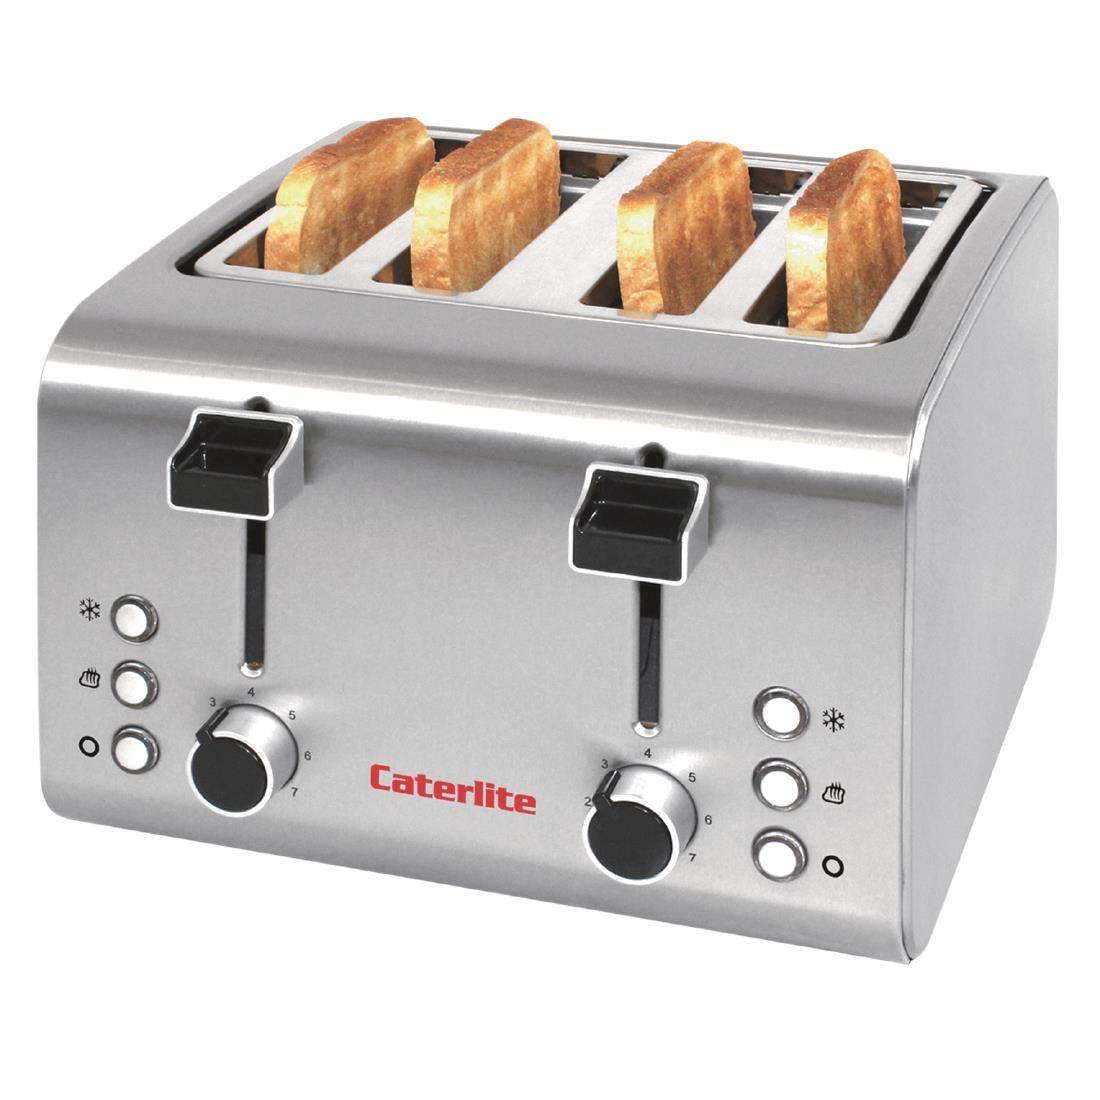 Caterlite 4 Slot Stainless Steel Toaster - CP929  - 1